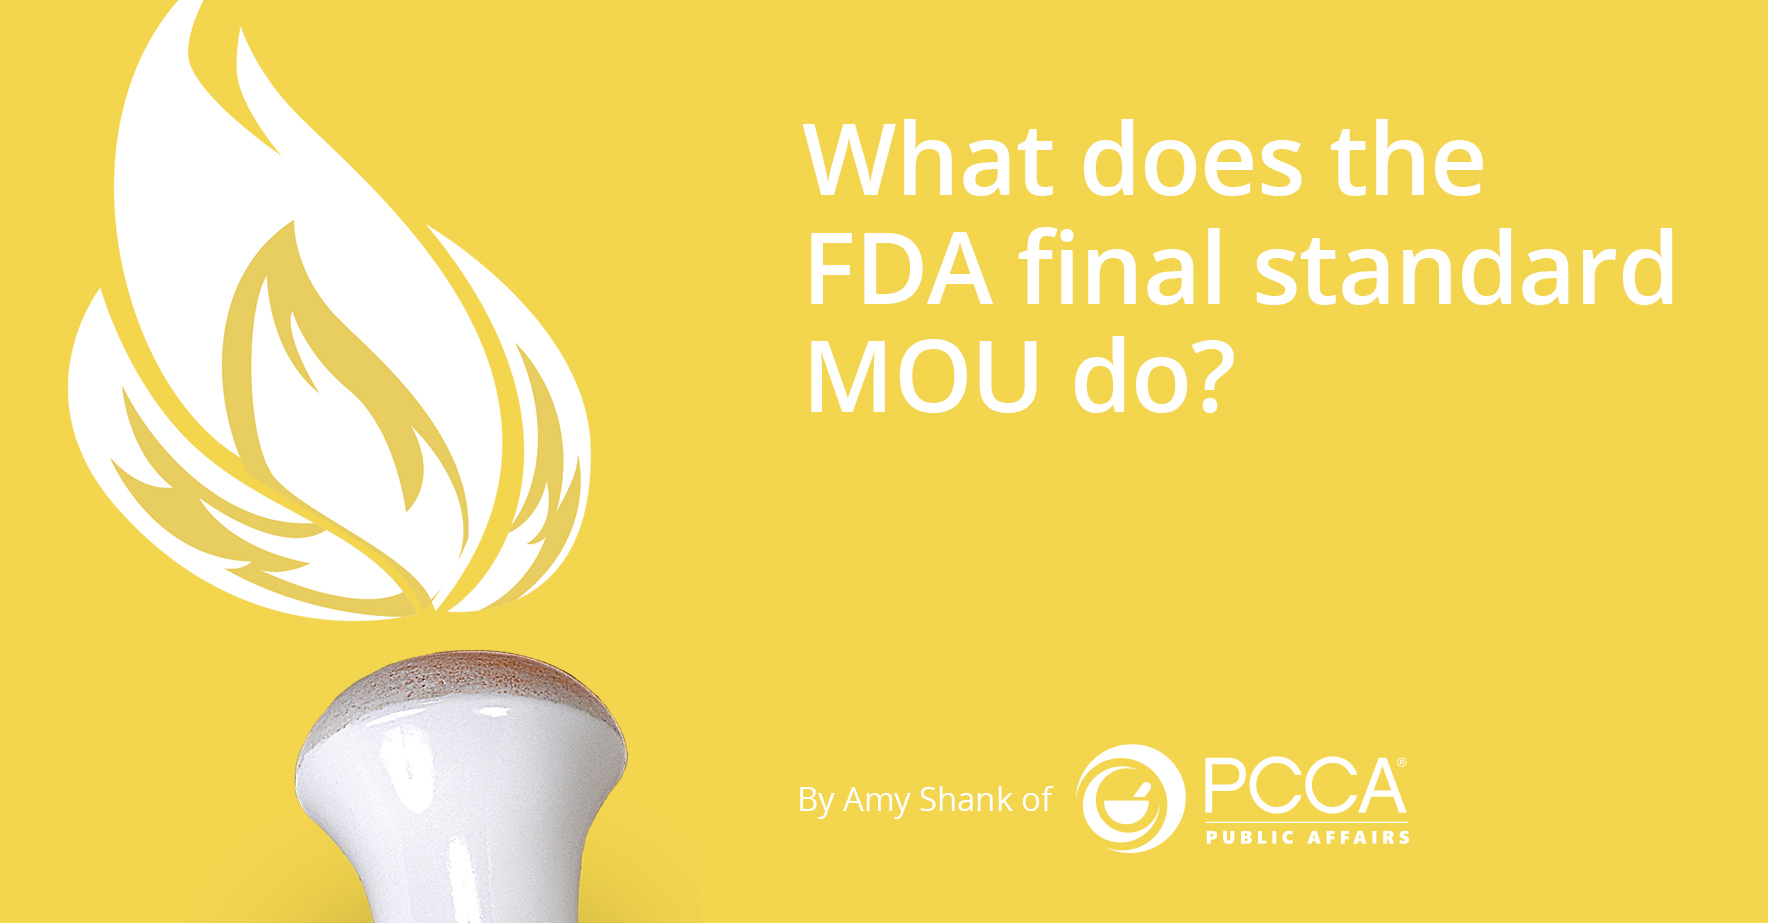 what_does_the_fda_final_standard_mou_do.jpg.